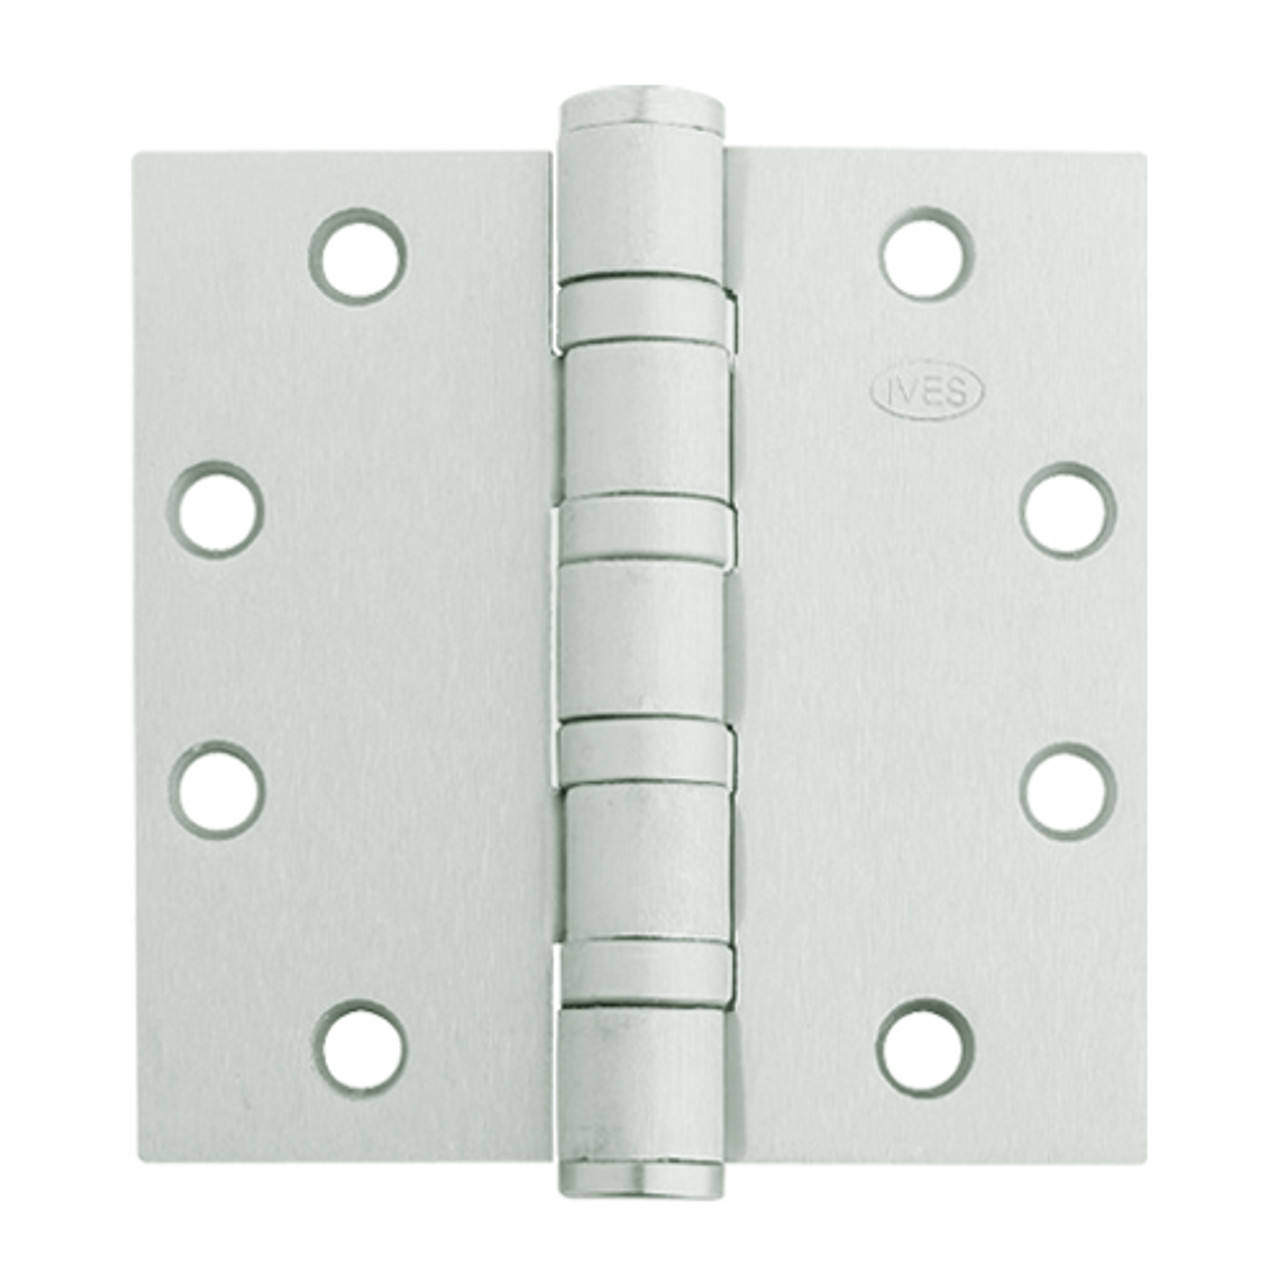 5BB1HW-4-5x4-5-619-TW4 IVES 5 Knuckle Ball Bearing Full Mortise Hinge with Electric Thru-Wire in Satin Nickel